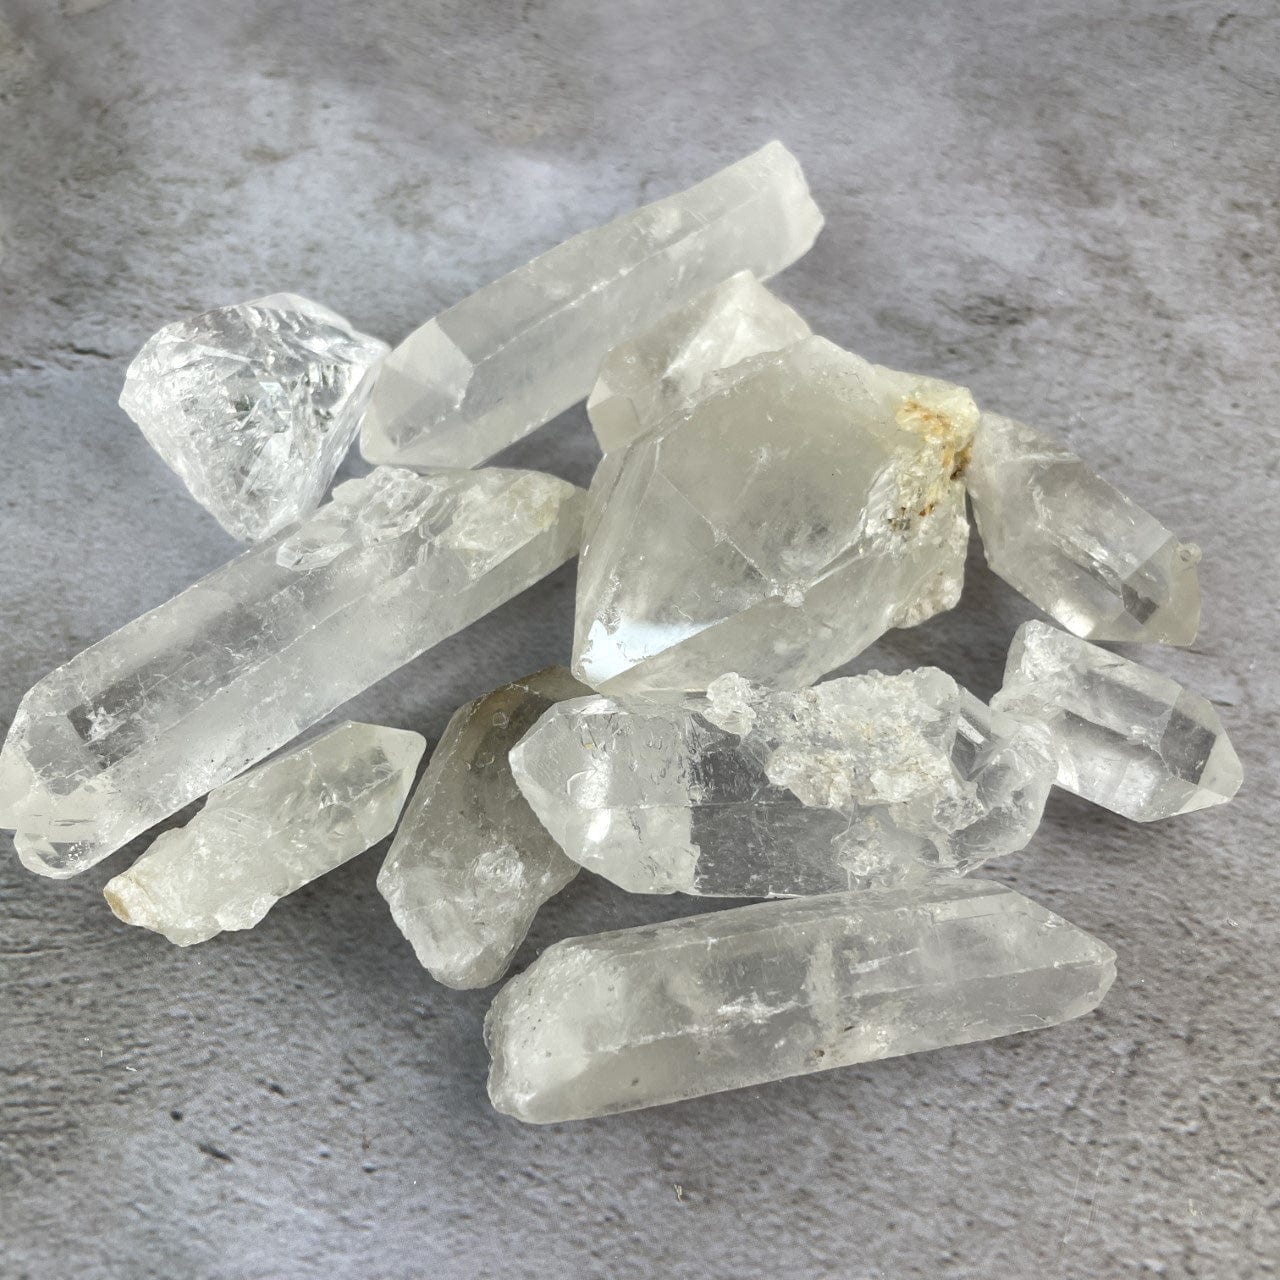 Crystal Quartz Points - 1 Pound Bag worth in a pile